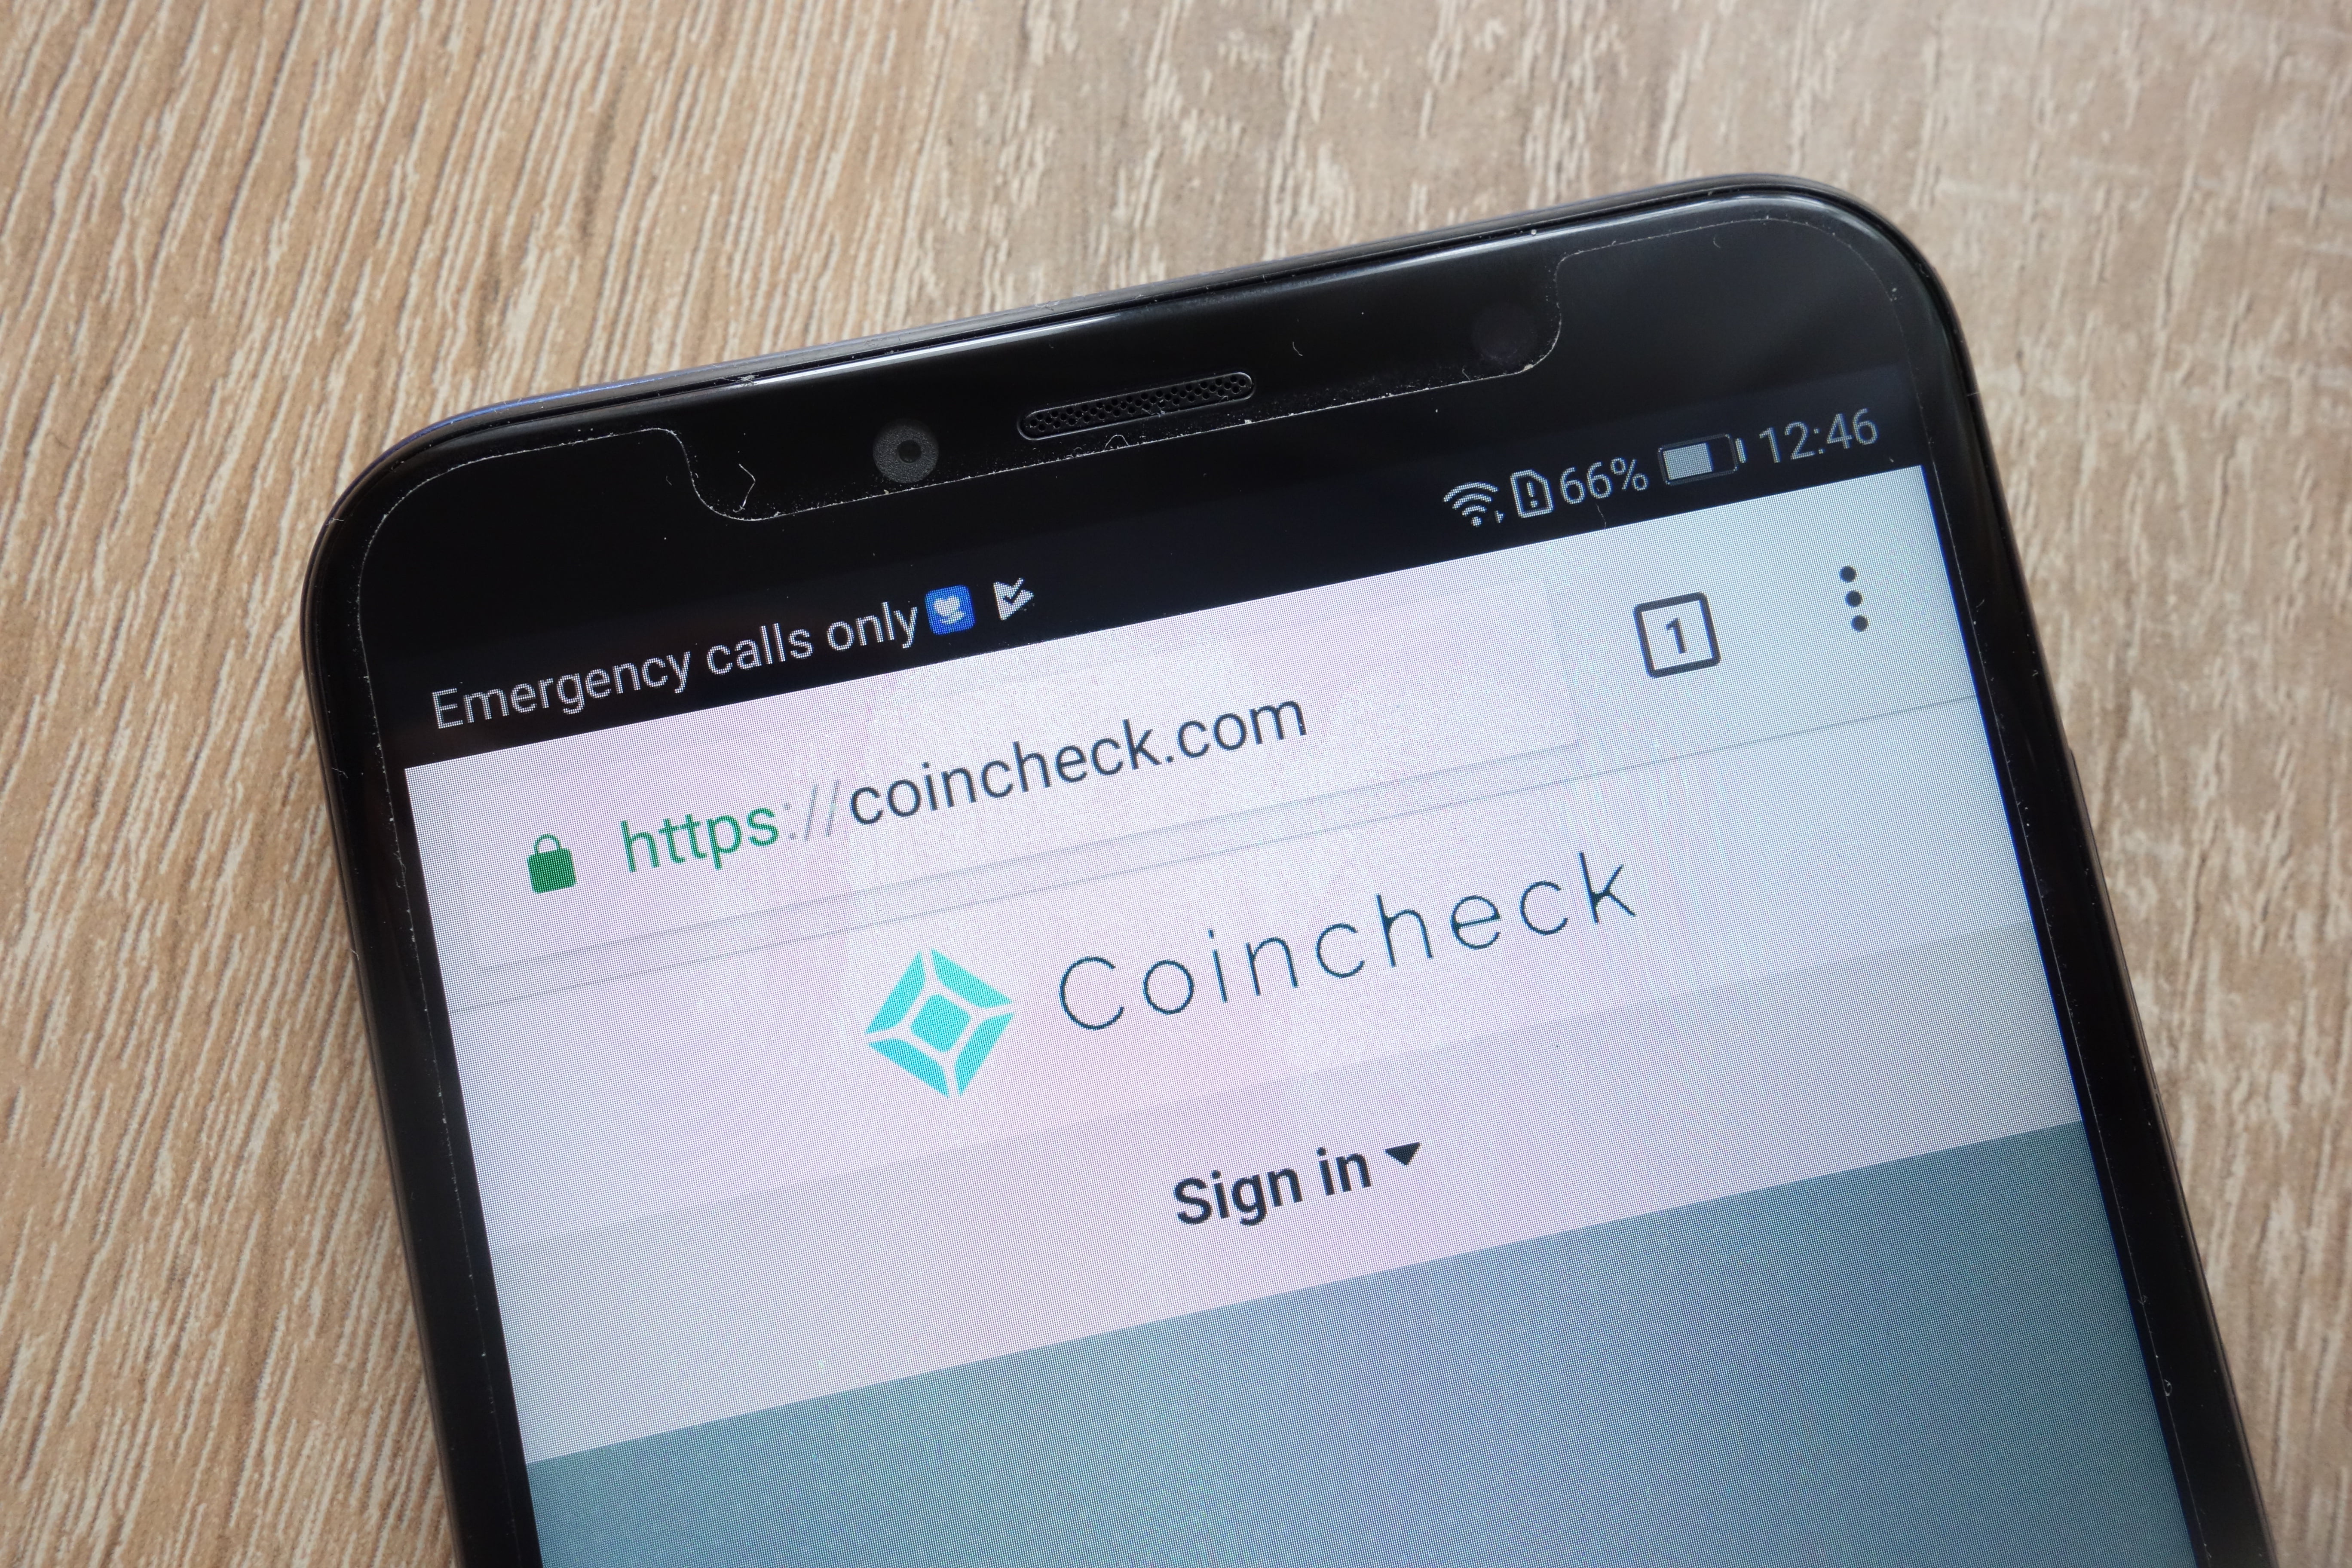 Crypto Exchange Coincheck to Receive Full Licensing from Japanese Authorities